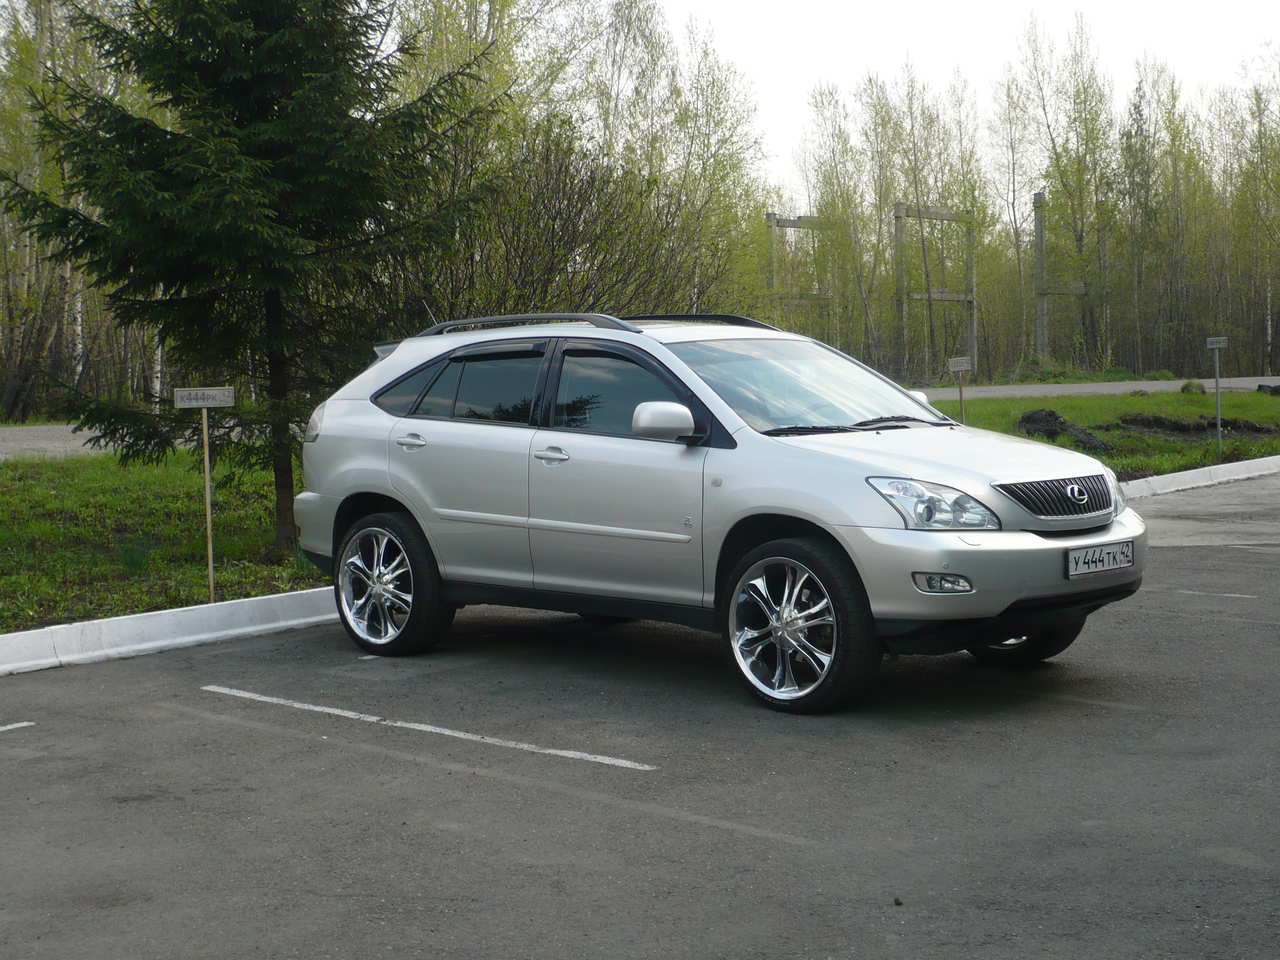 Lexus RX 300 2004 TECHNICAL SPECIFICATIONS